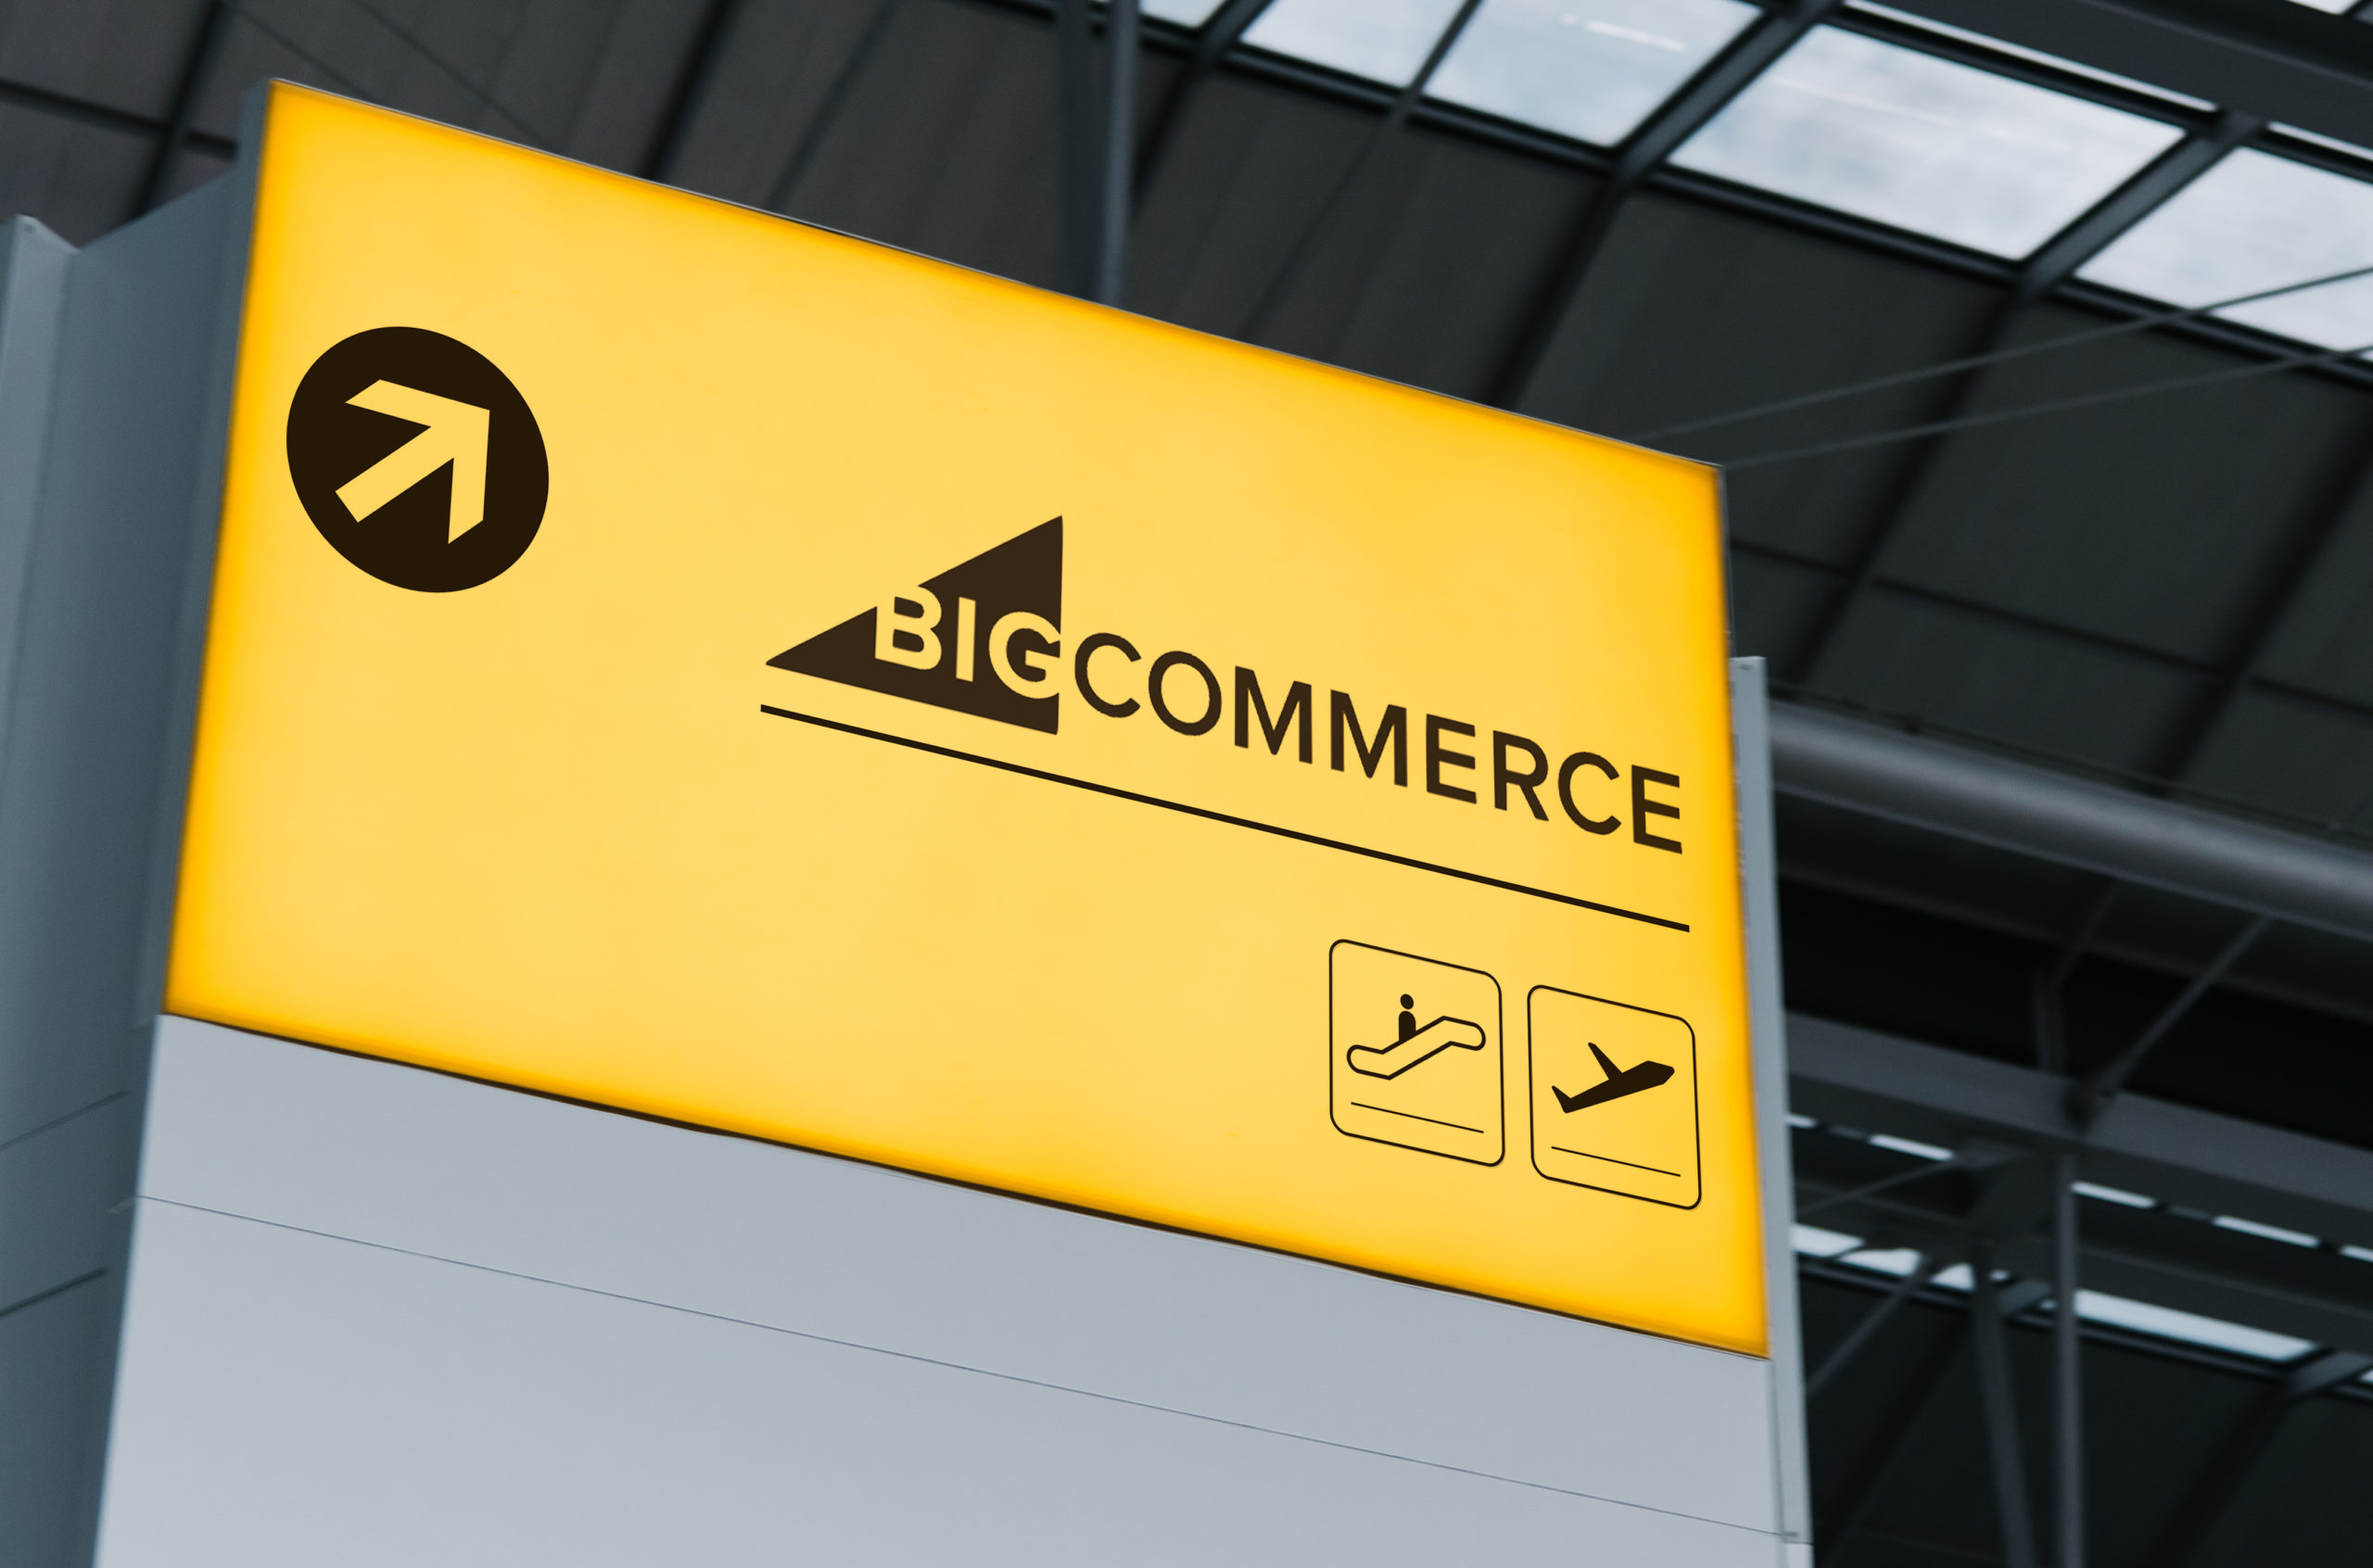 BigCommerce expands to France